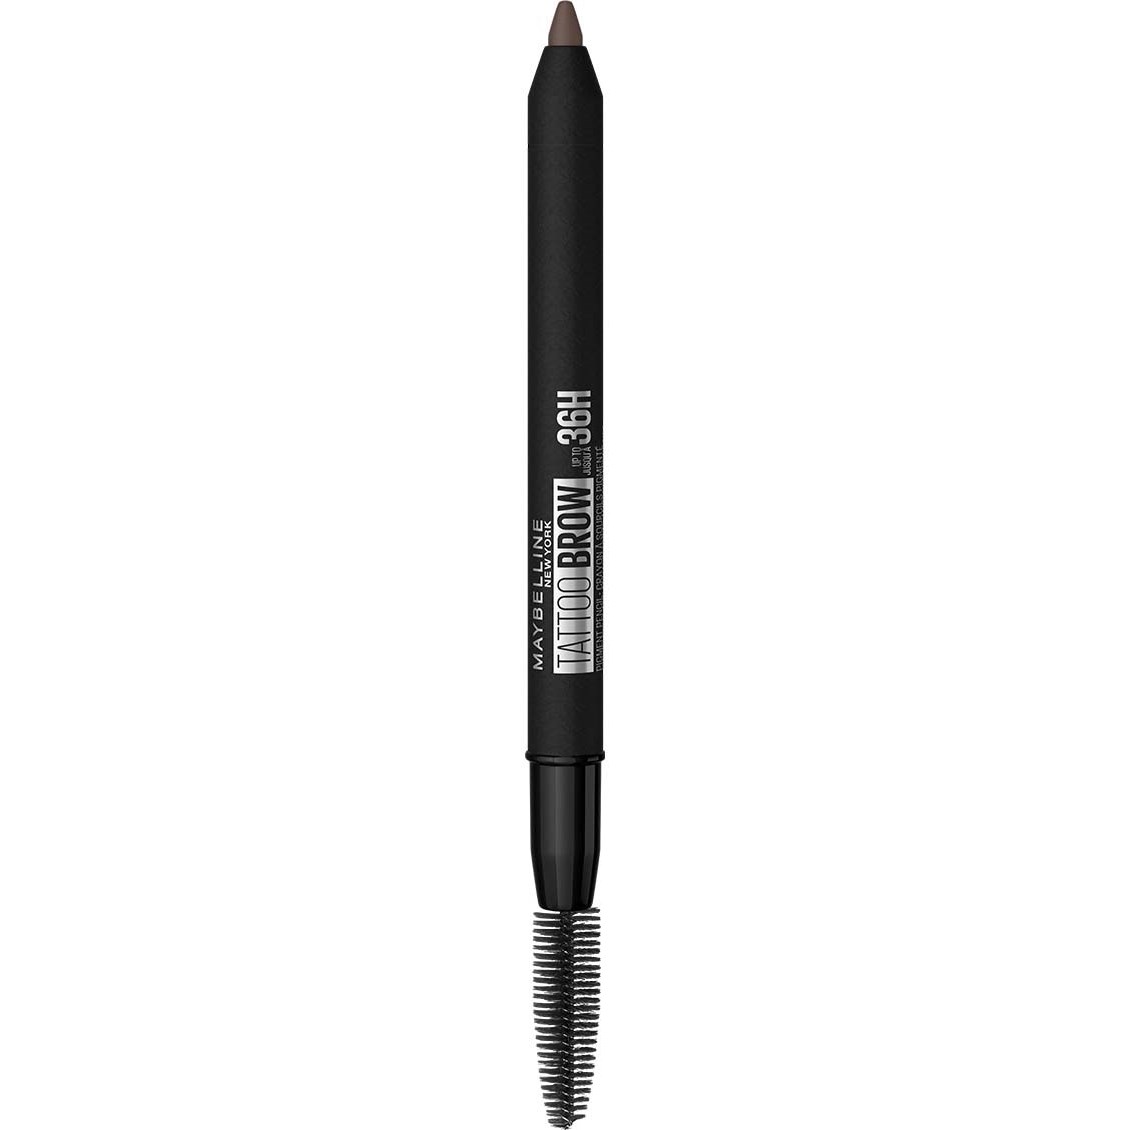 Läs mer om Maybelline New York Tattoo Brow up to 36H Pencil Deep Brown 7